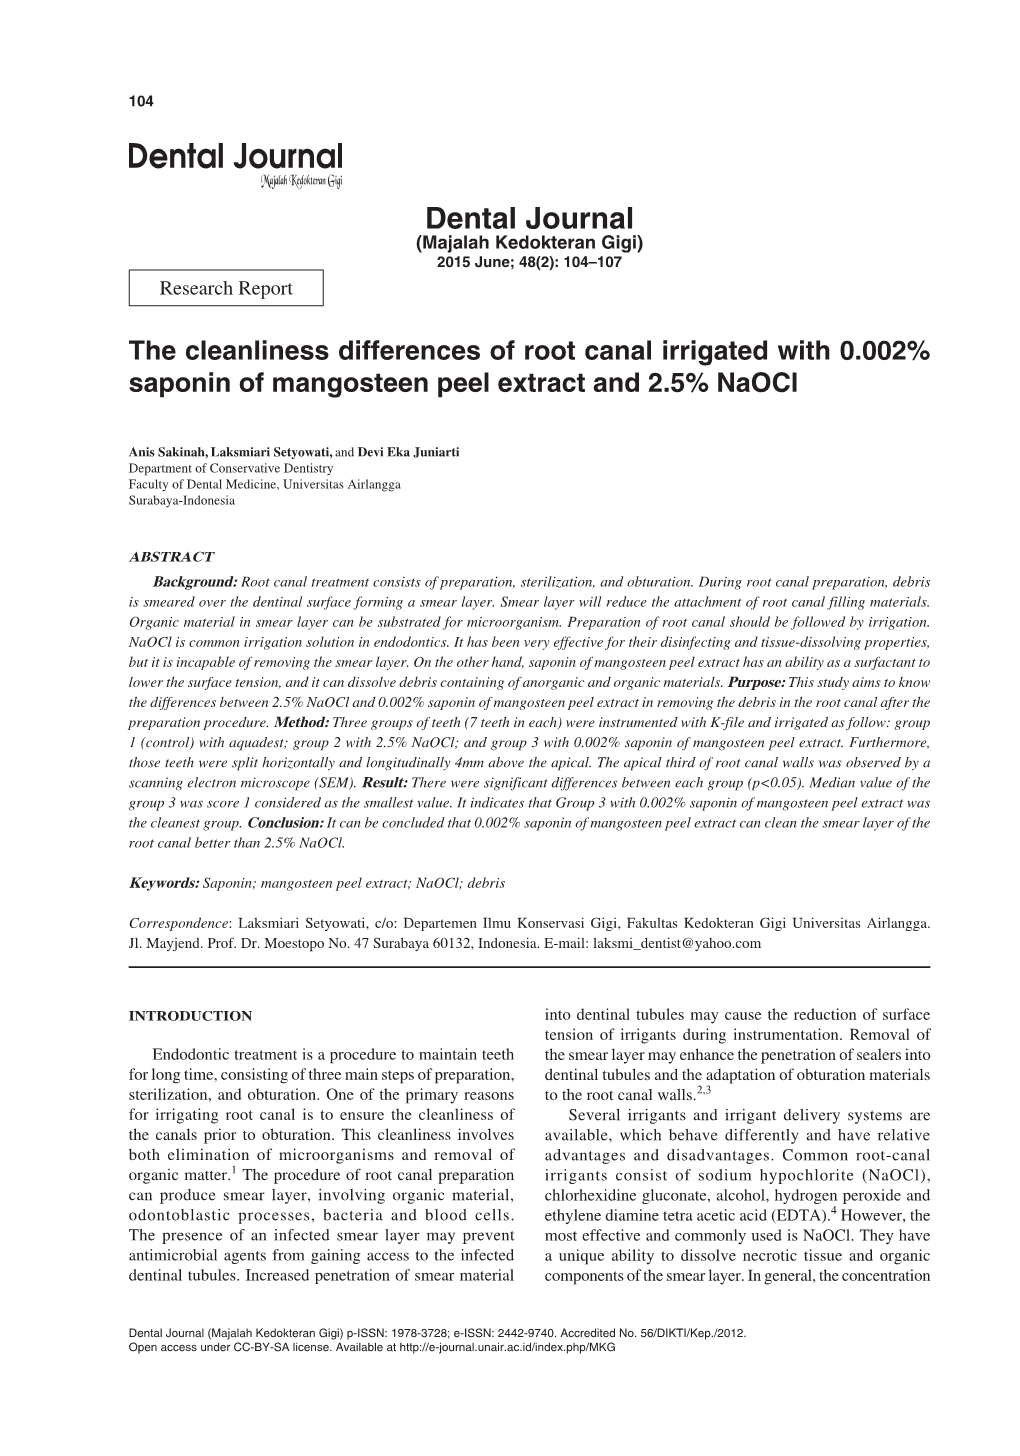 The Cleanliness Differences of Root Canal Irrigated with 0.002% Saponin of Mangosteen Peel Extract and 2.5% Naocl